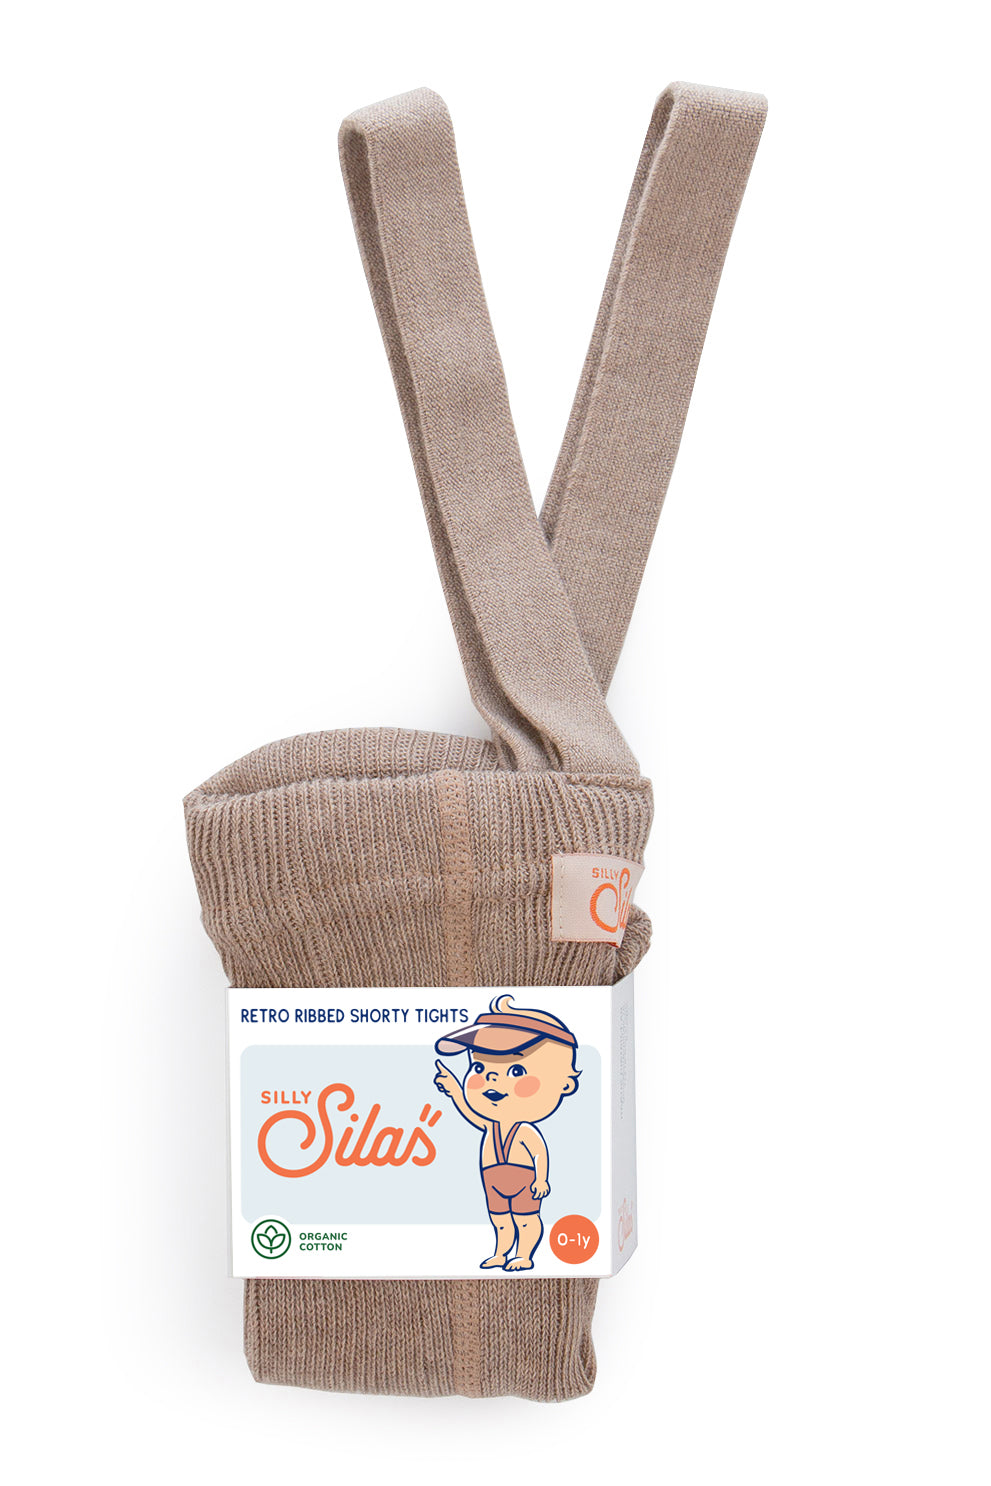 Silly Silas SHORTY Tights Peanut Blend